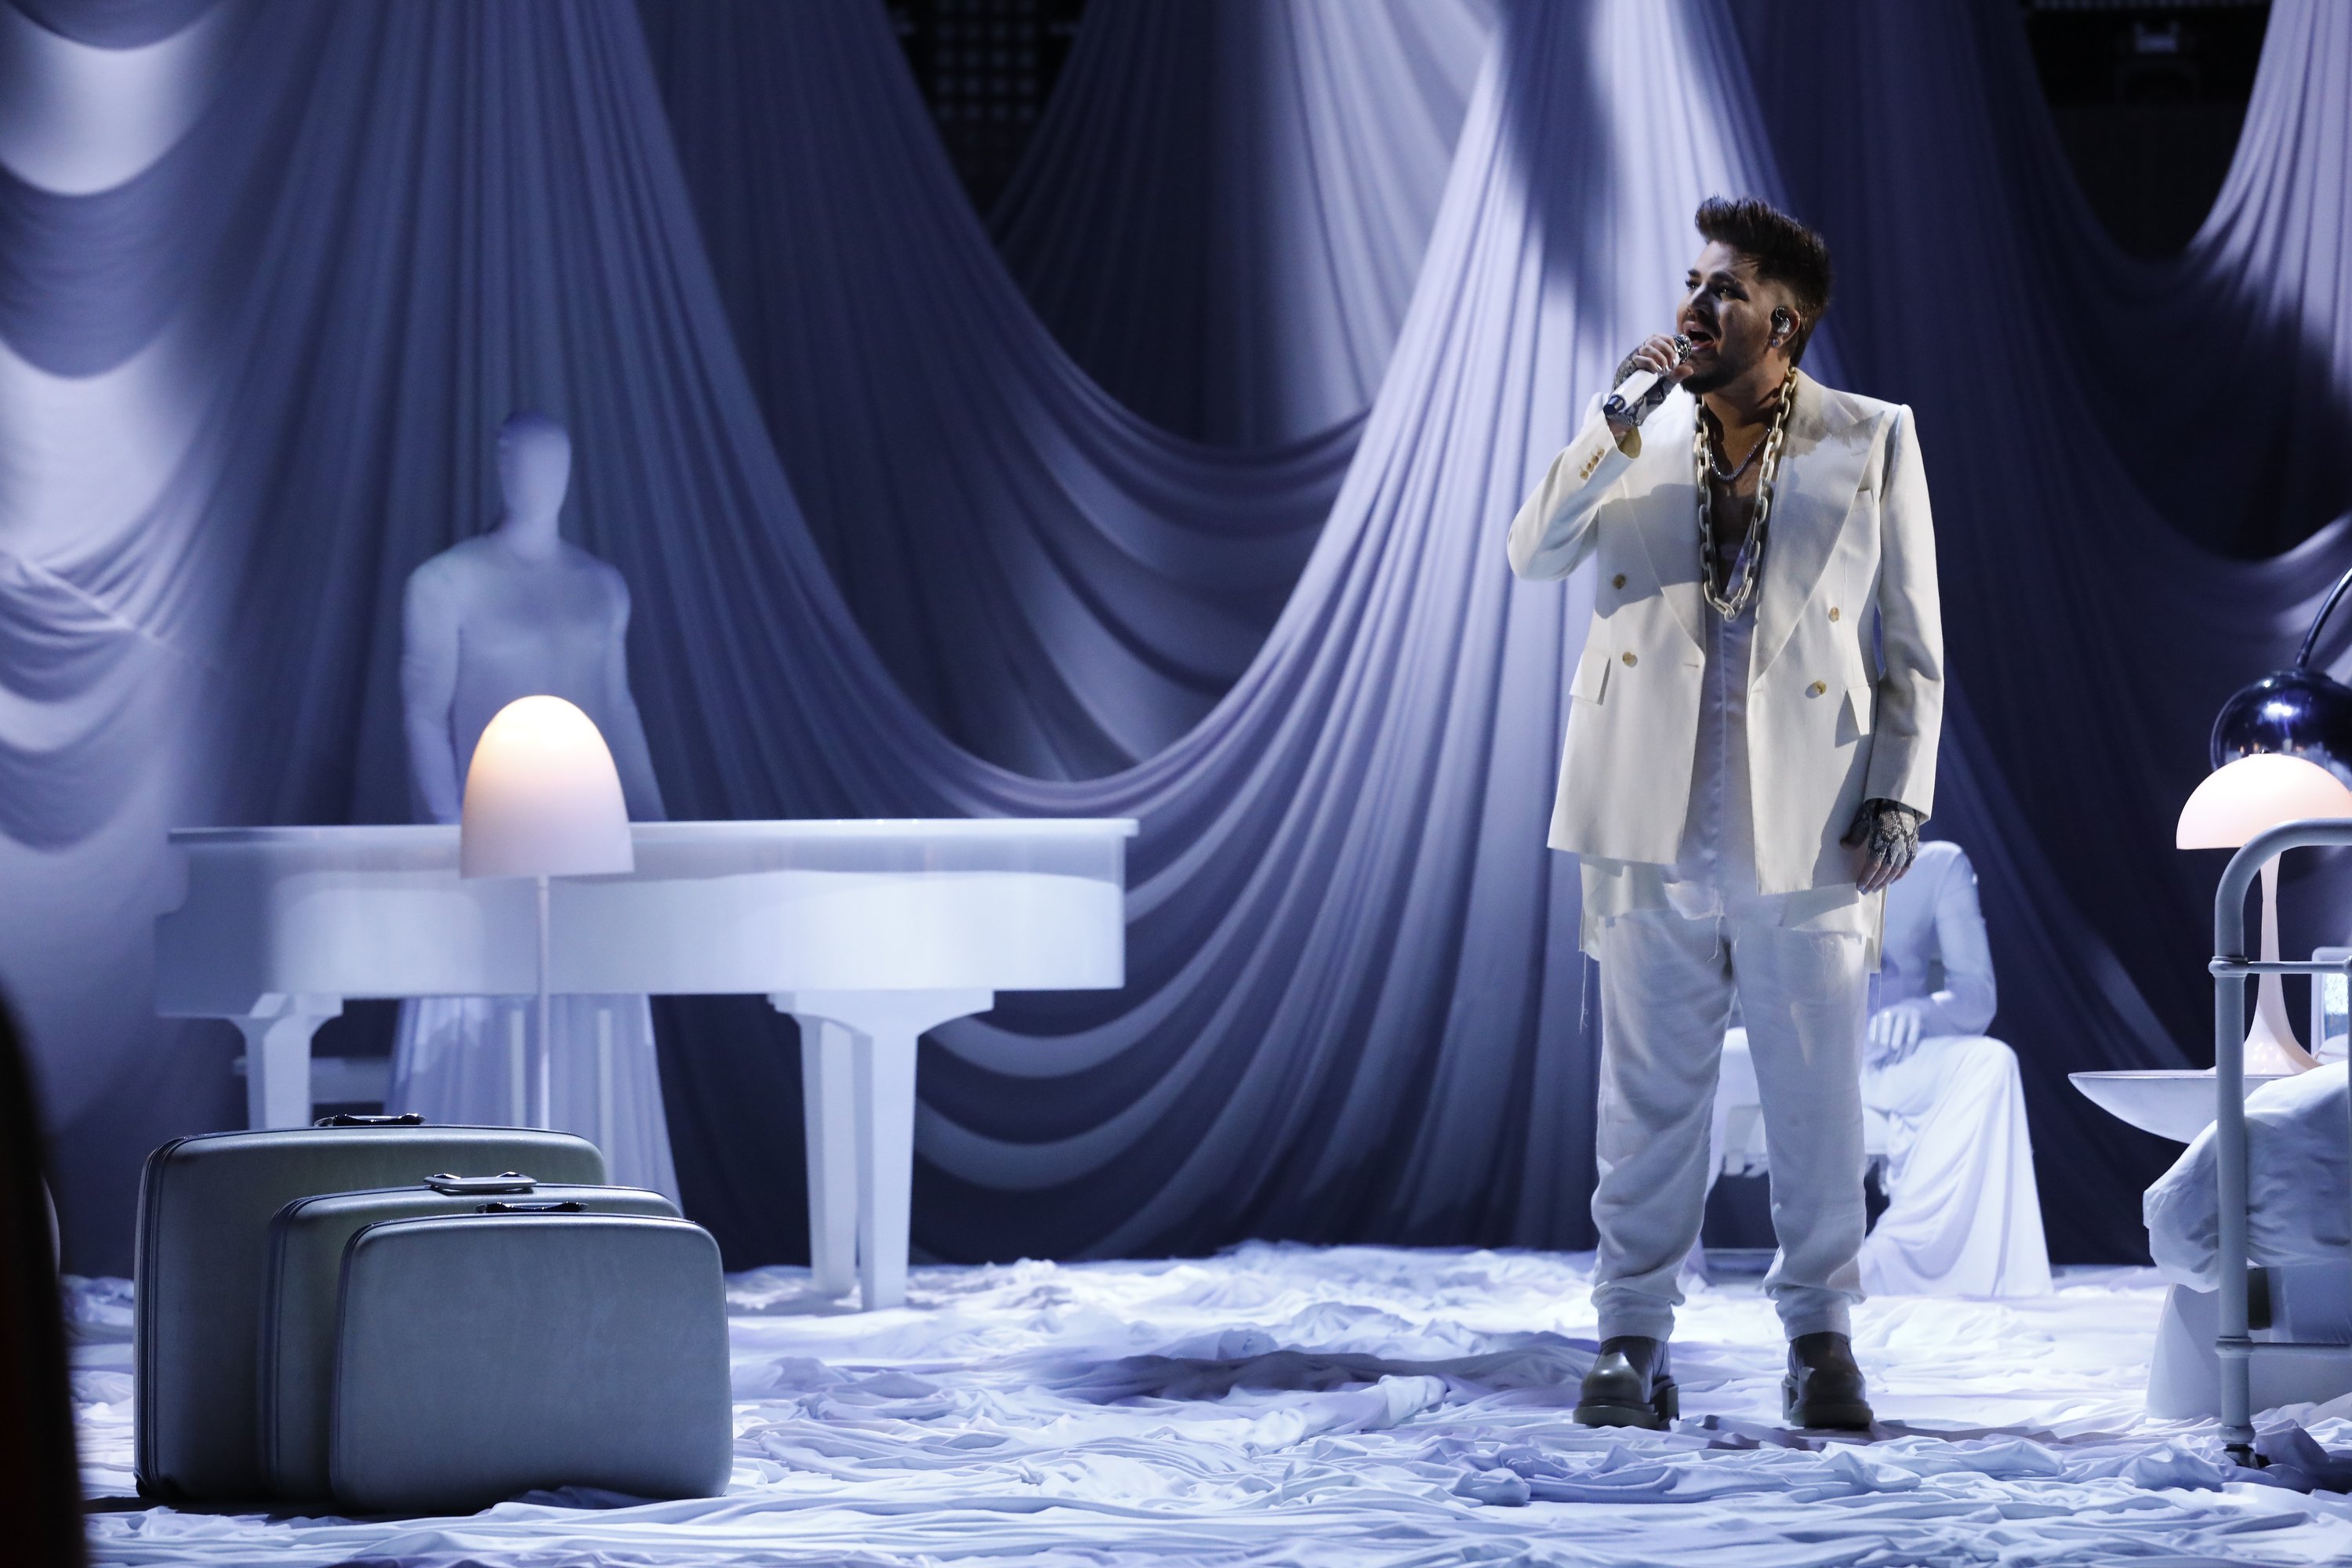 Adam Lambert performing during the live finale of “The Voice” on December 12, 2022.  | Source: Getty Images